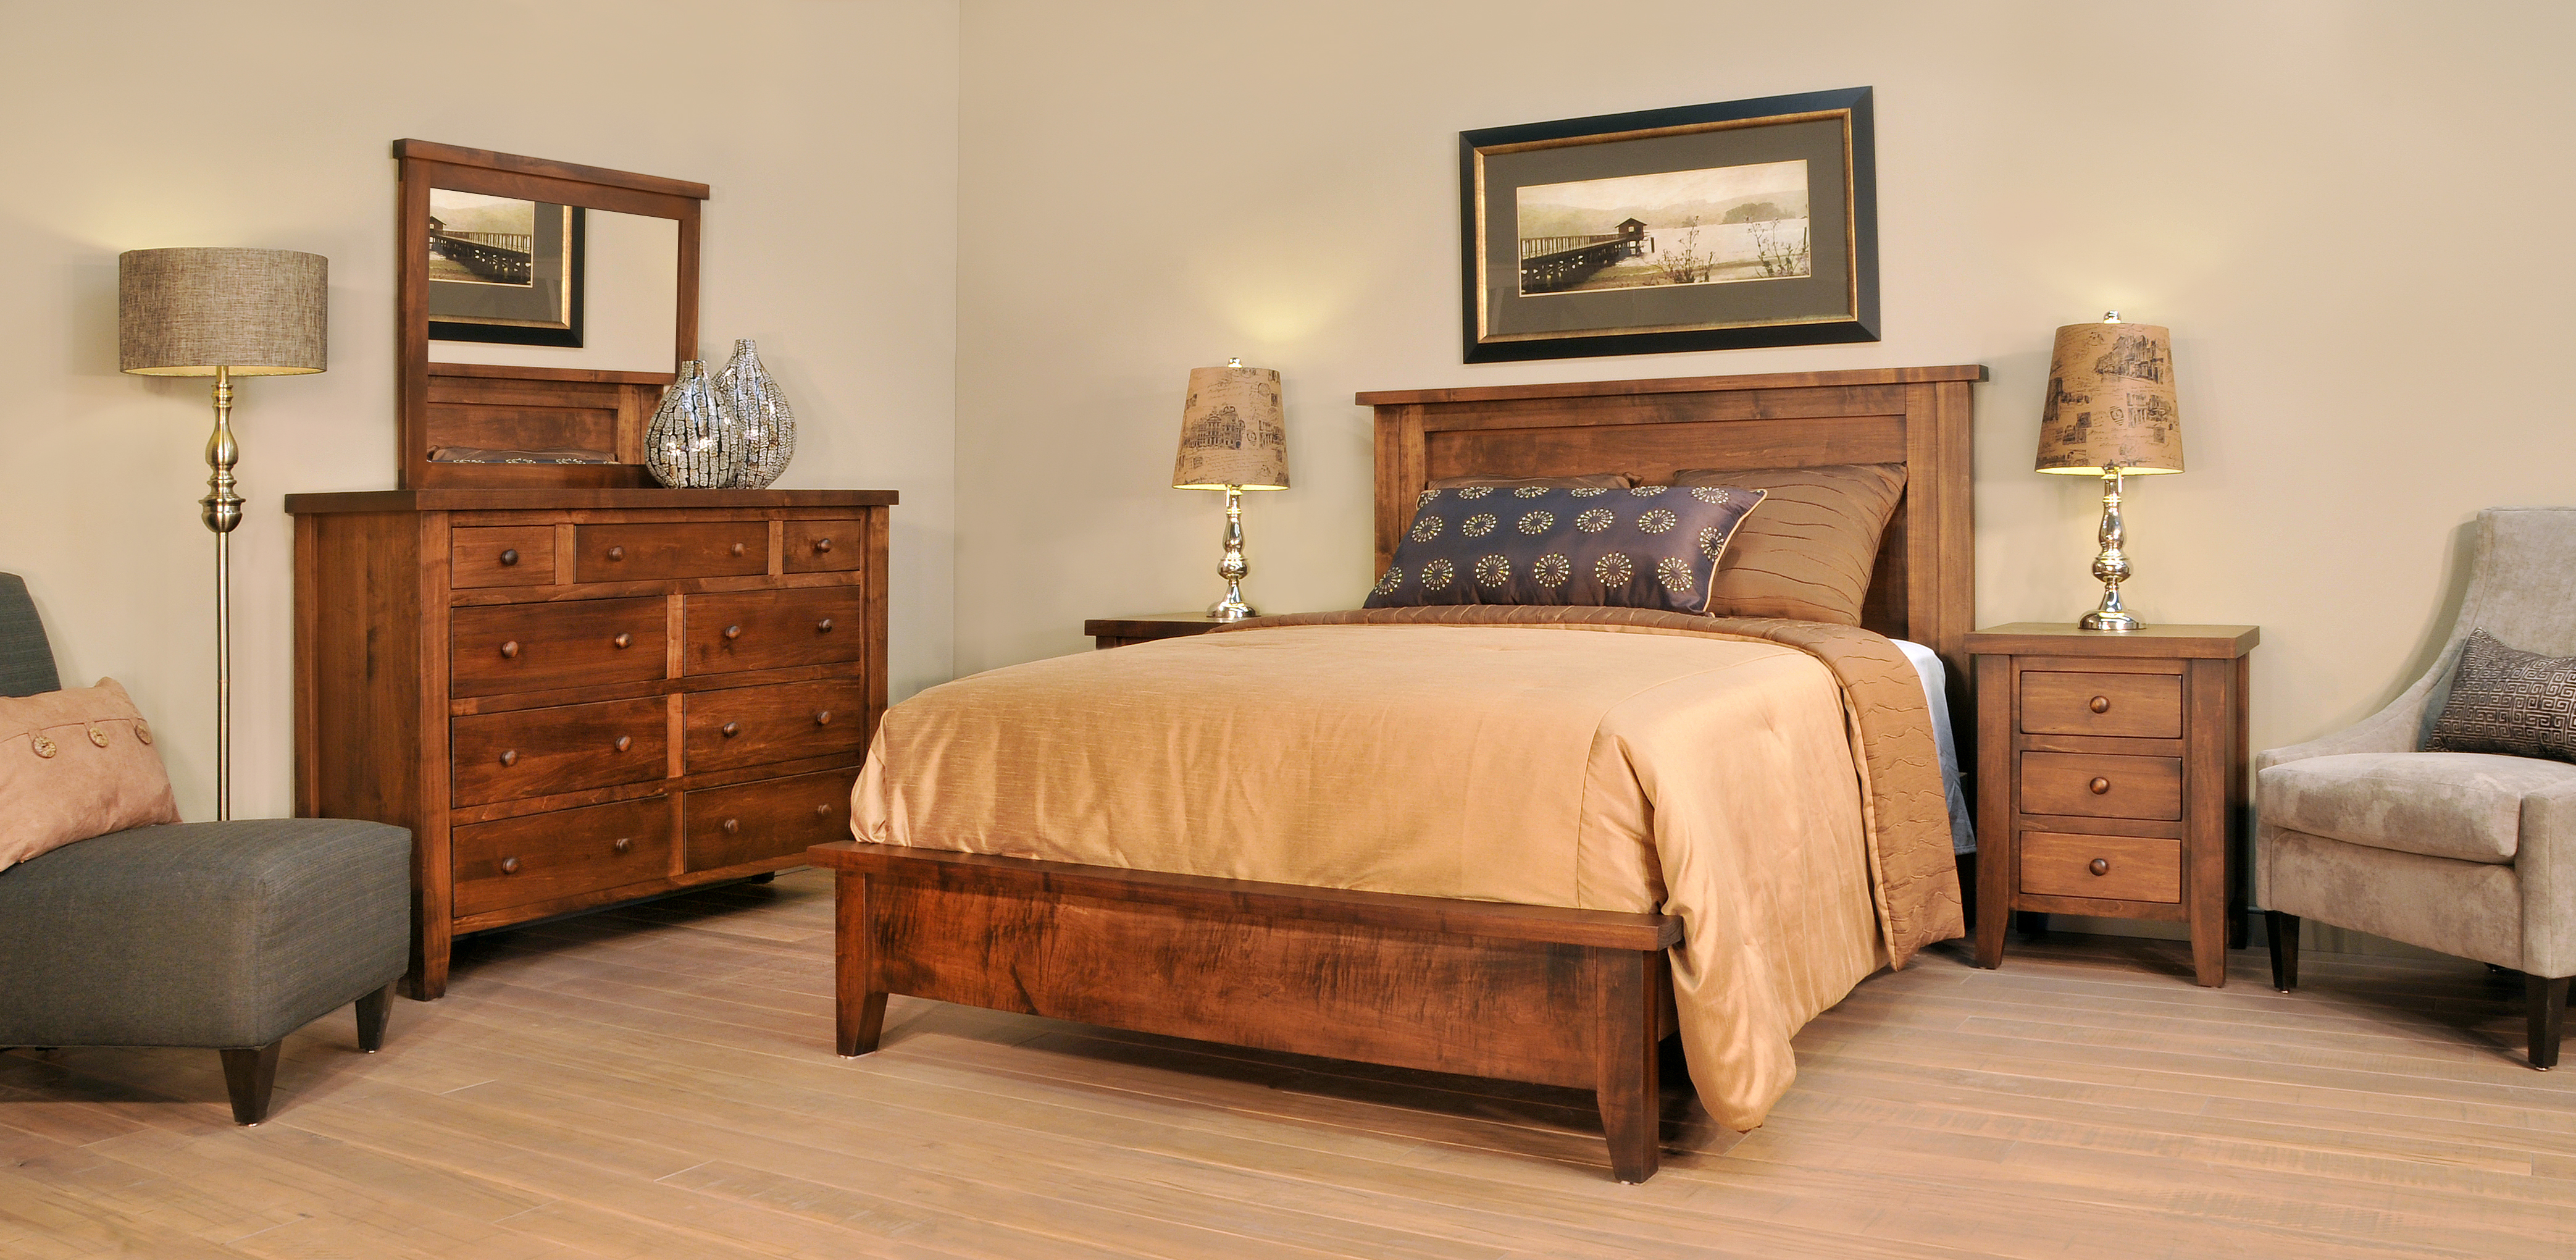 Farmhouse Bed Collection Amish Oak Warehouse within measurements 4172 X 2040